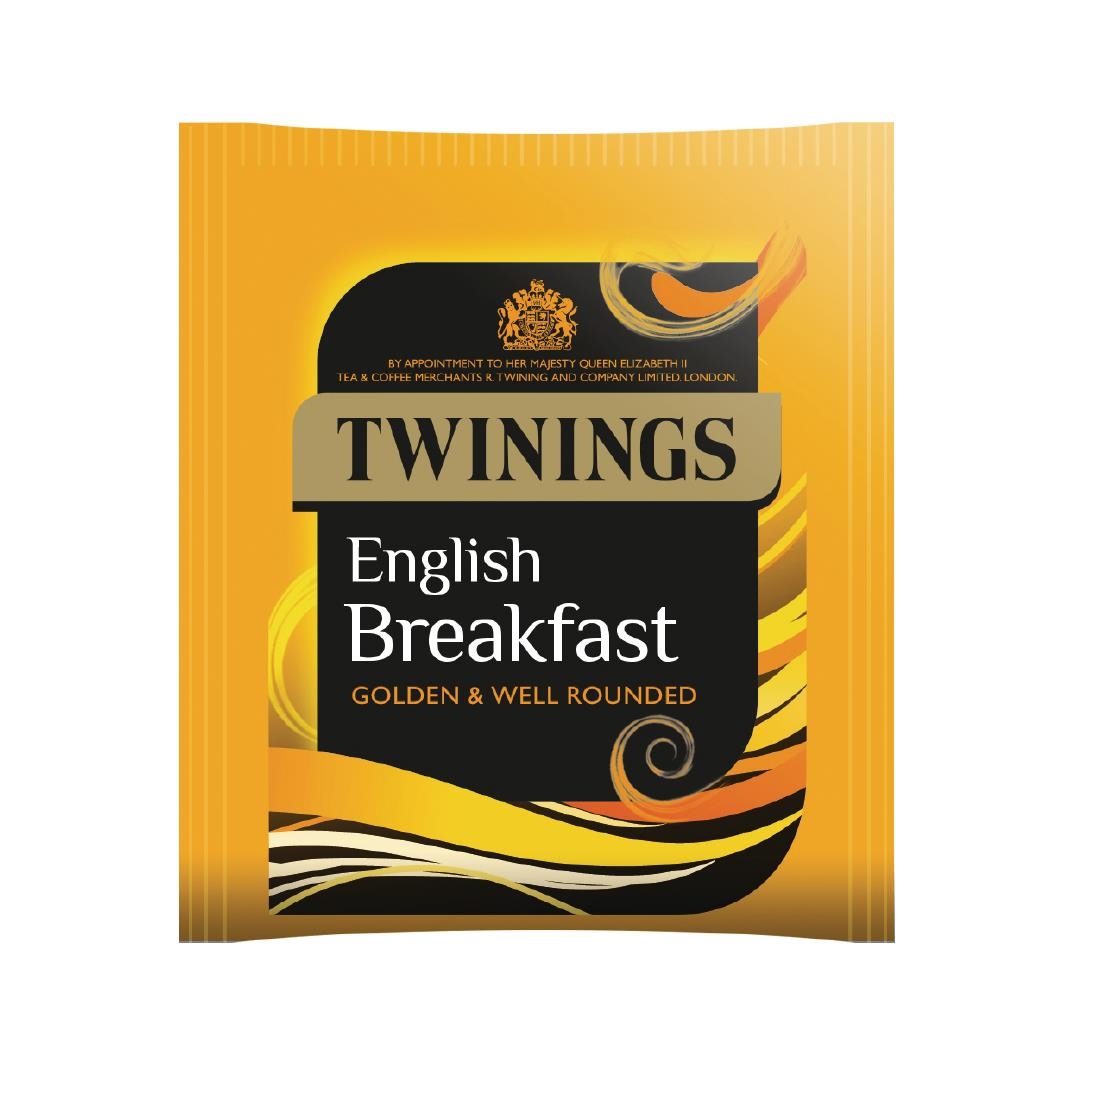 Twinings Traditional English Breakfast Envelopes (6 x Box 50) - DN810 - Buy  Online at Nisbets